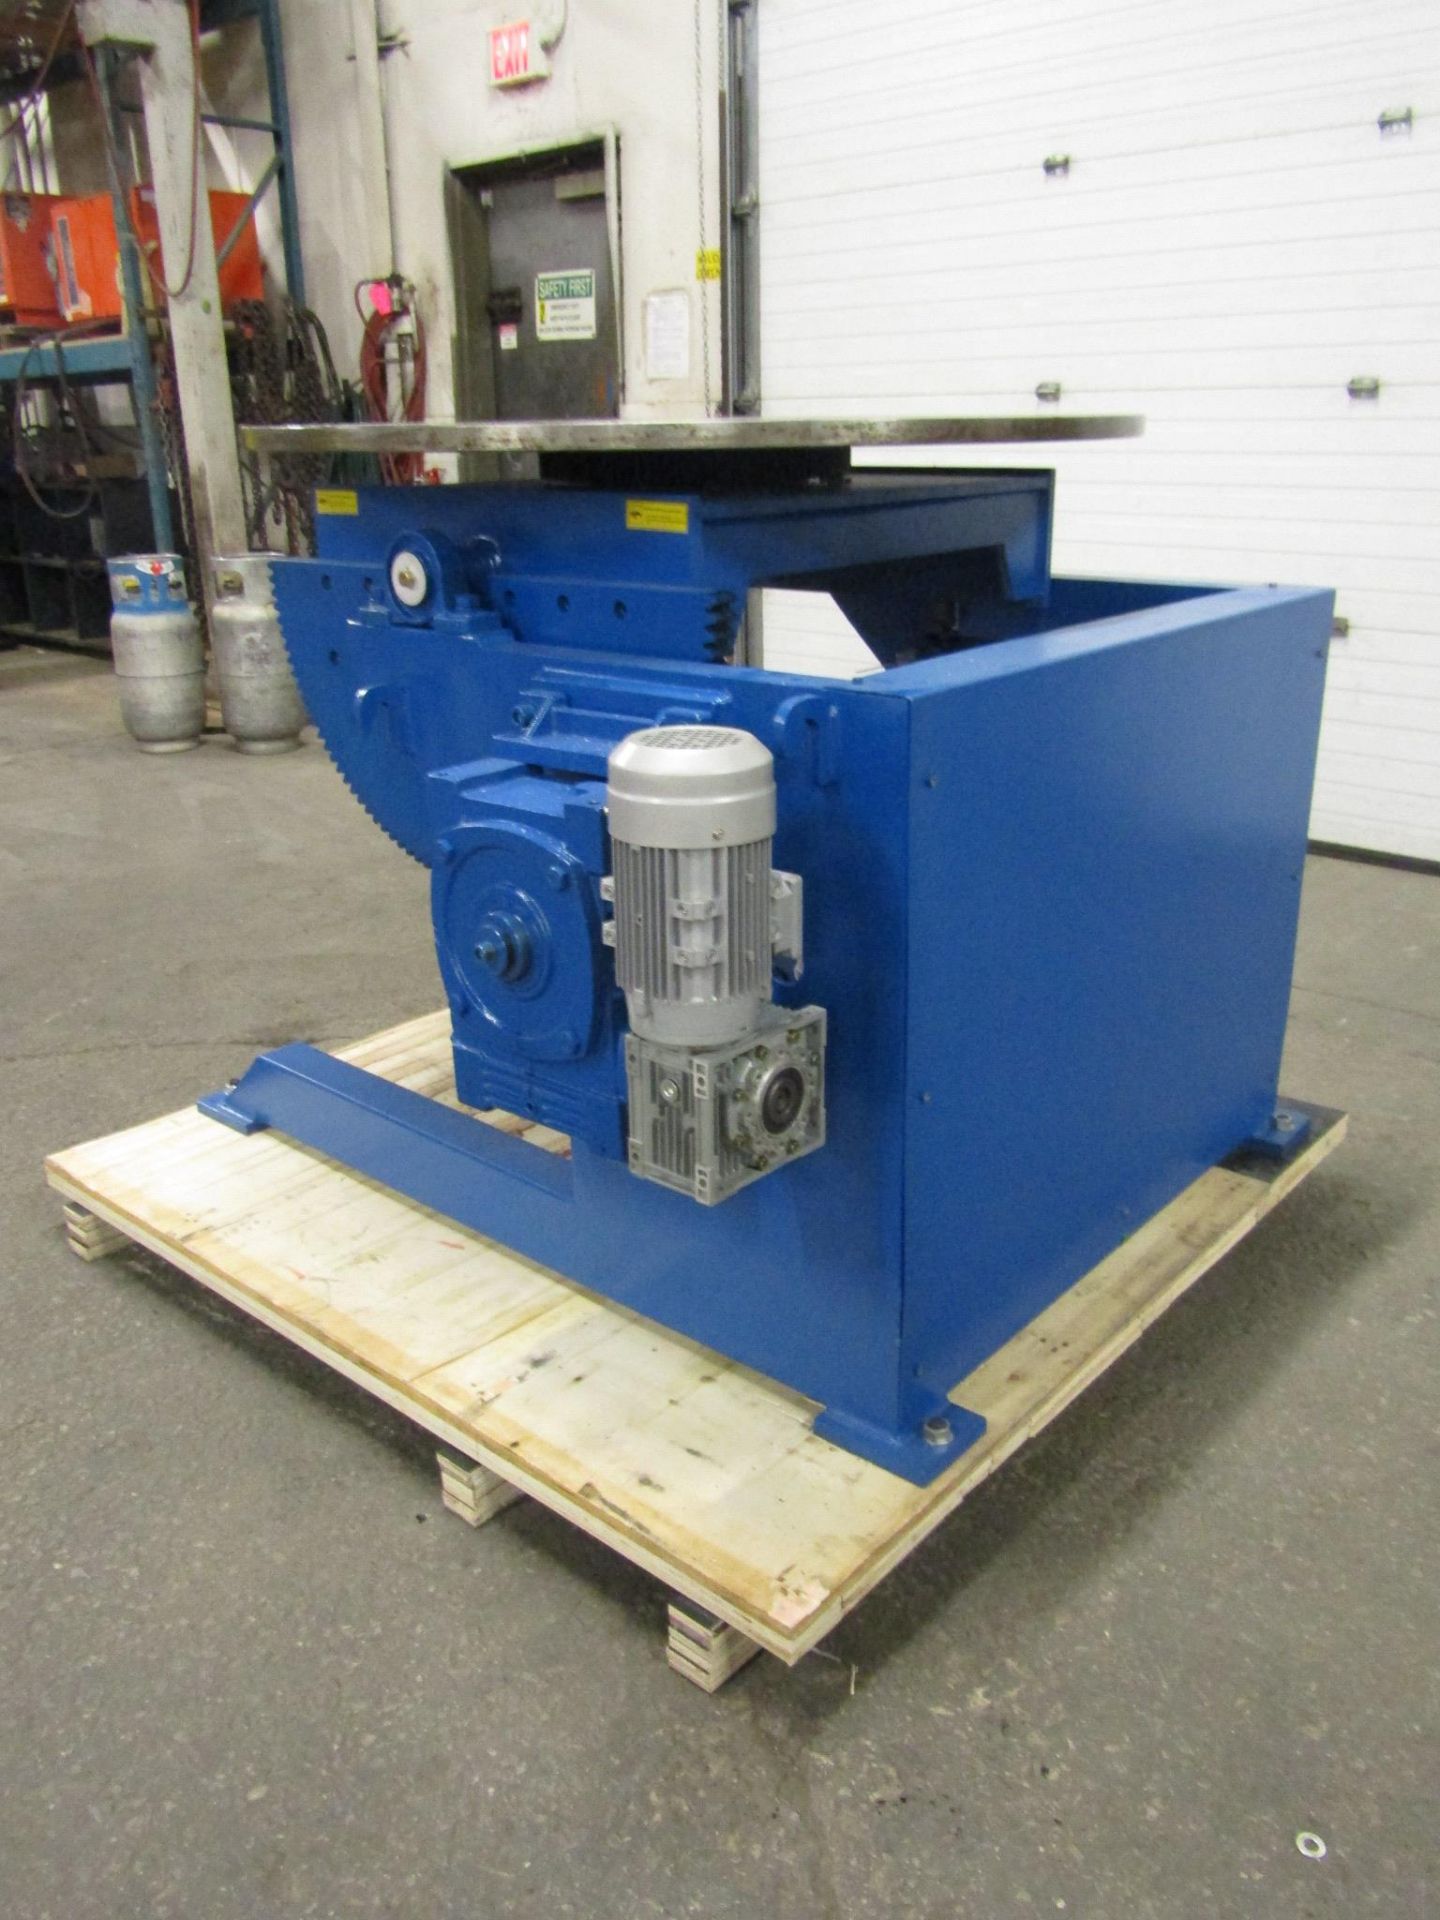 Verner model VD-3000 WELDING POSITIONER 3000lbs capacity - tilt and rotate with variable speed drive - Image 3 of 3